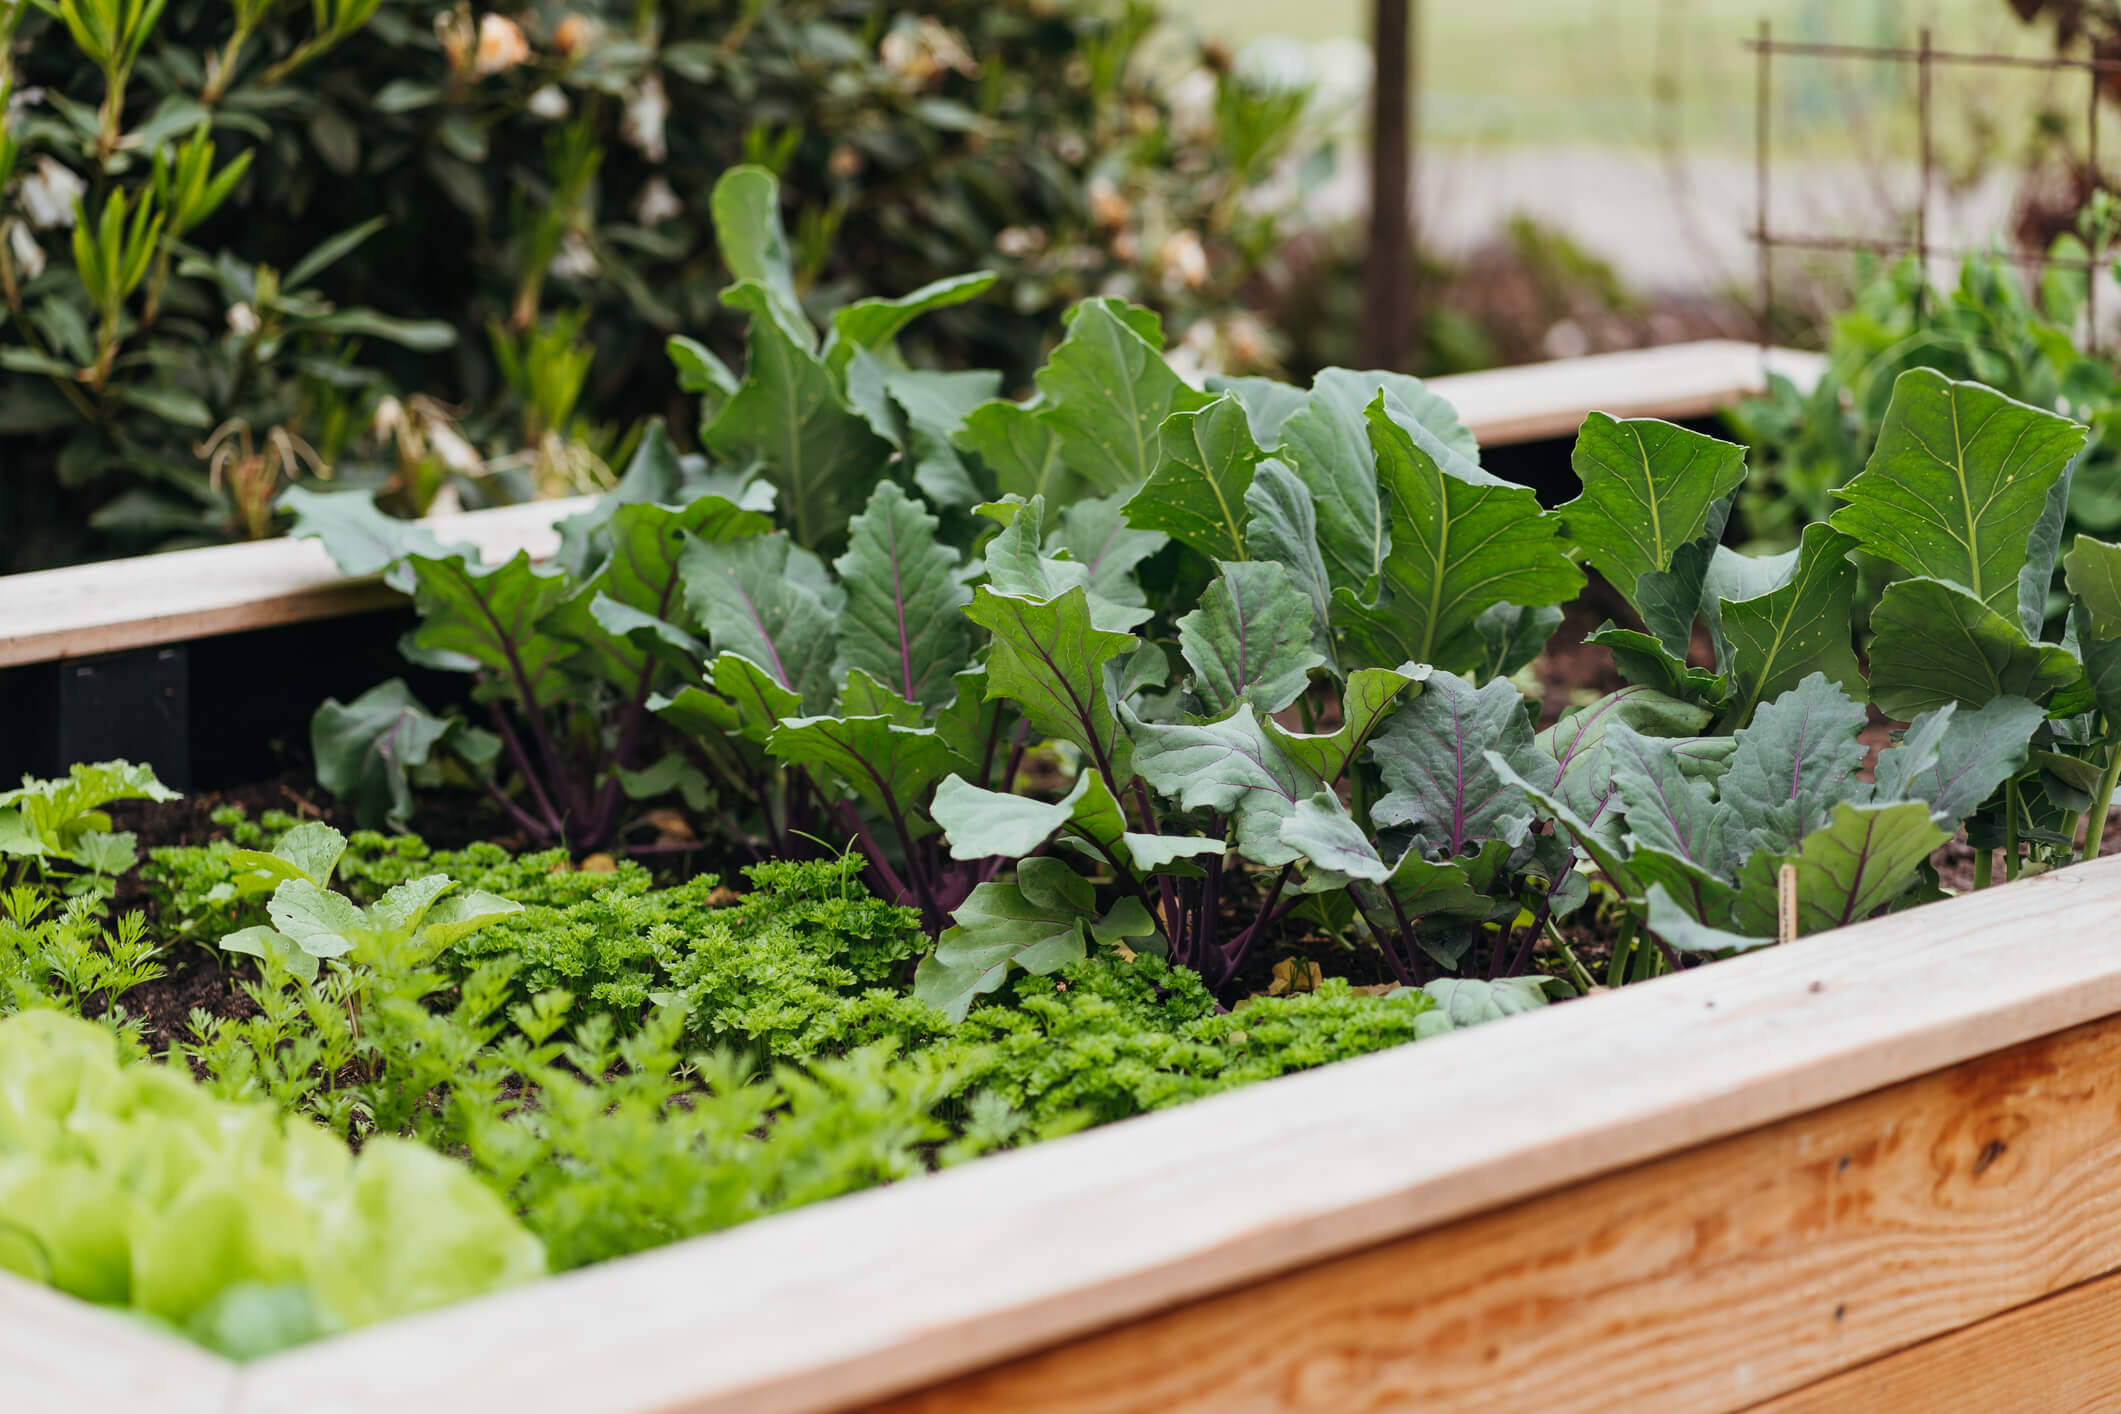 Make Building a Raised Garden Bed Your Next Budget-Friendly Project